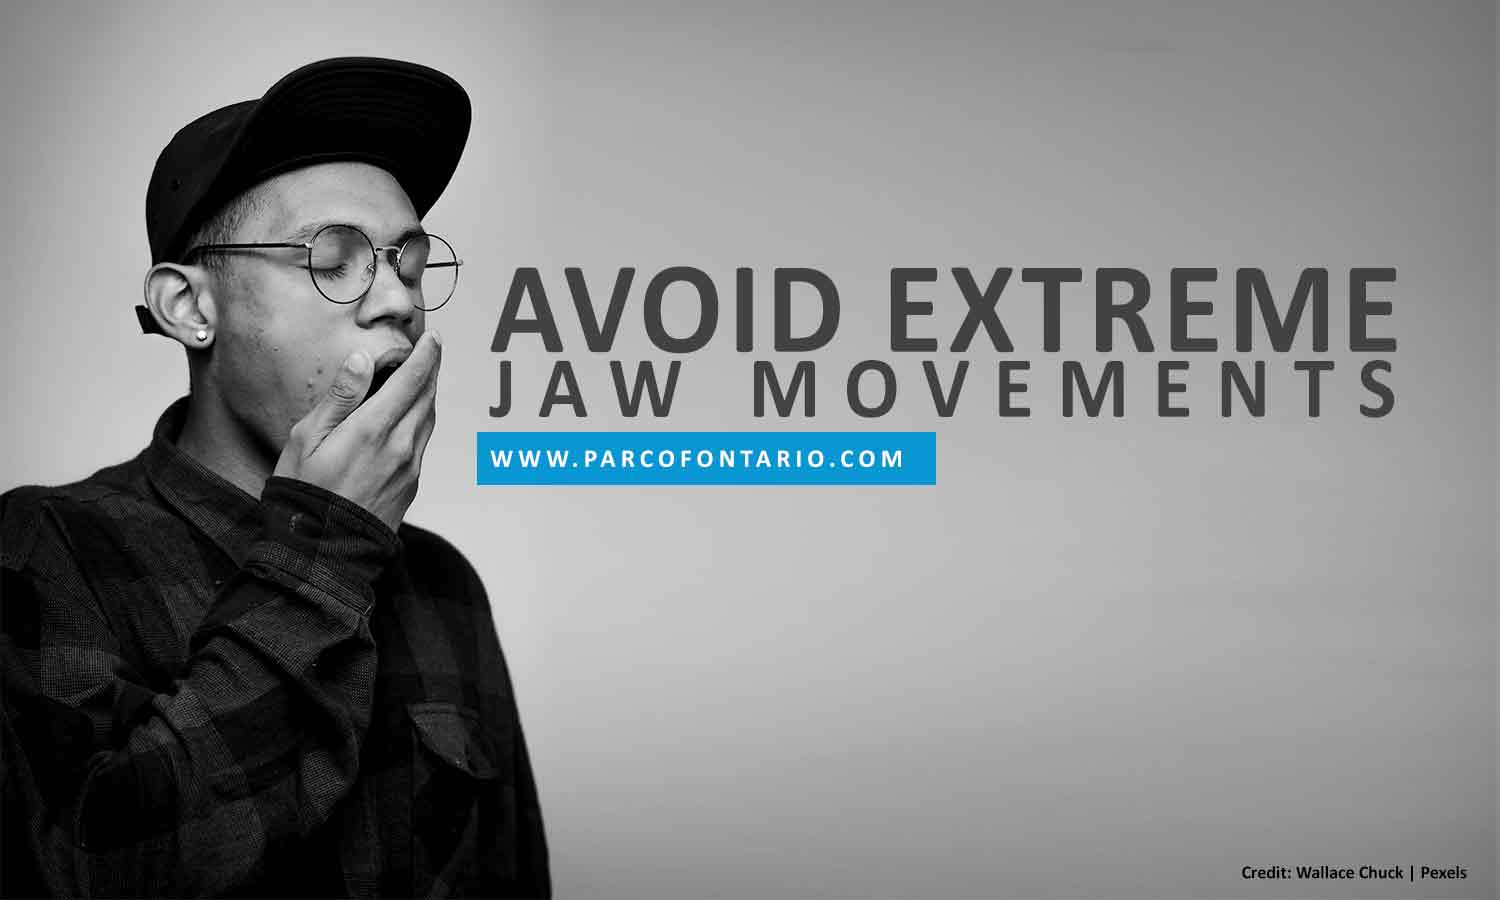 Avoid extreme jaw movements